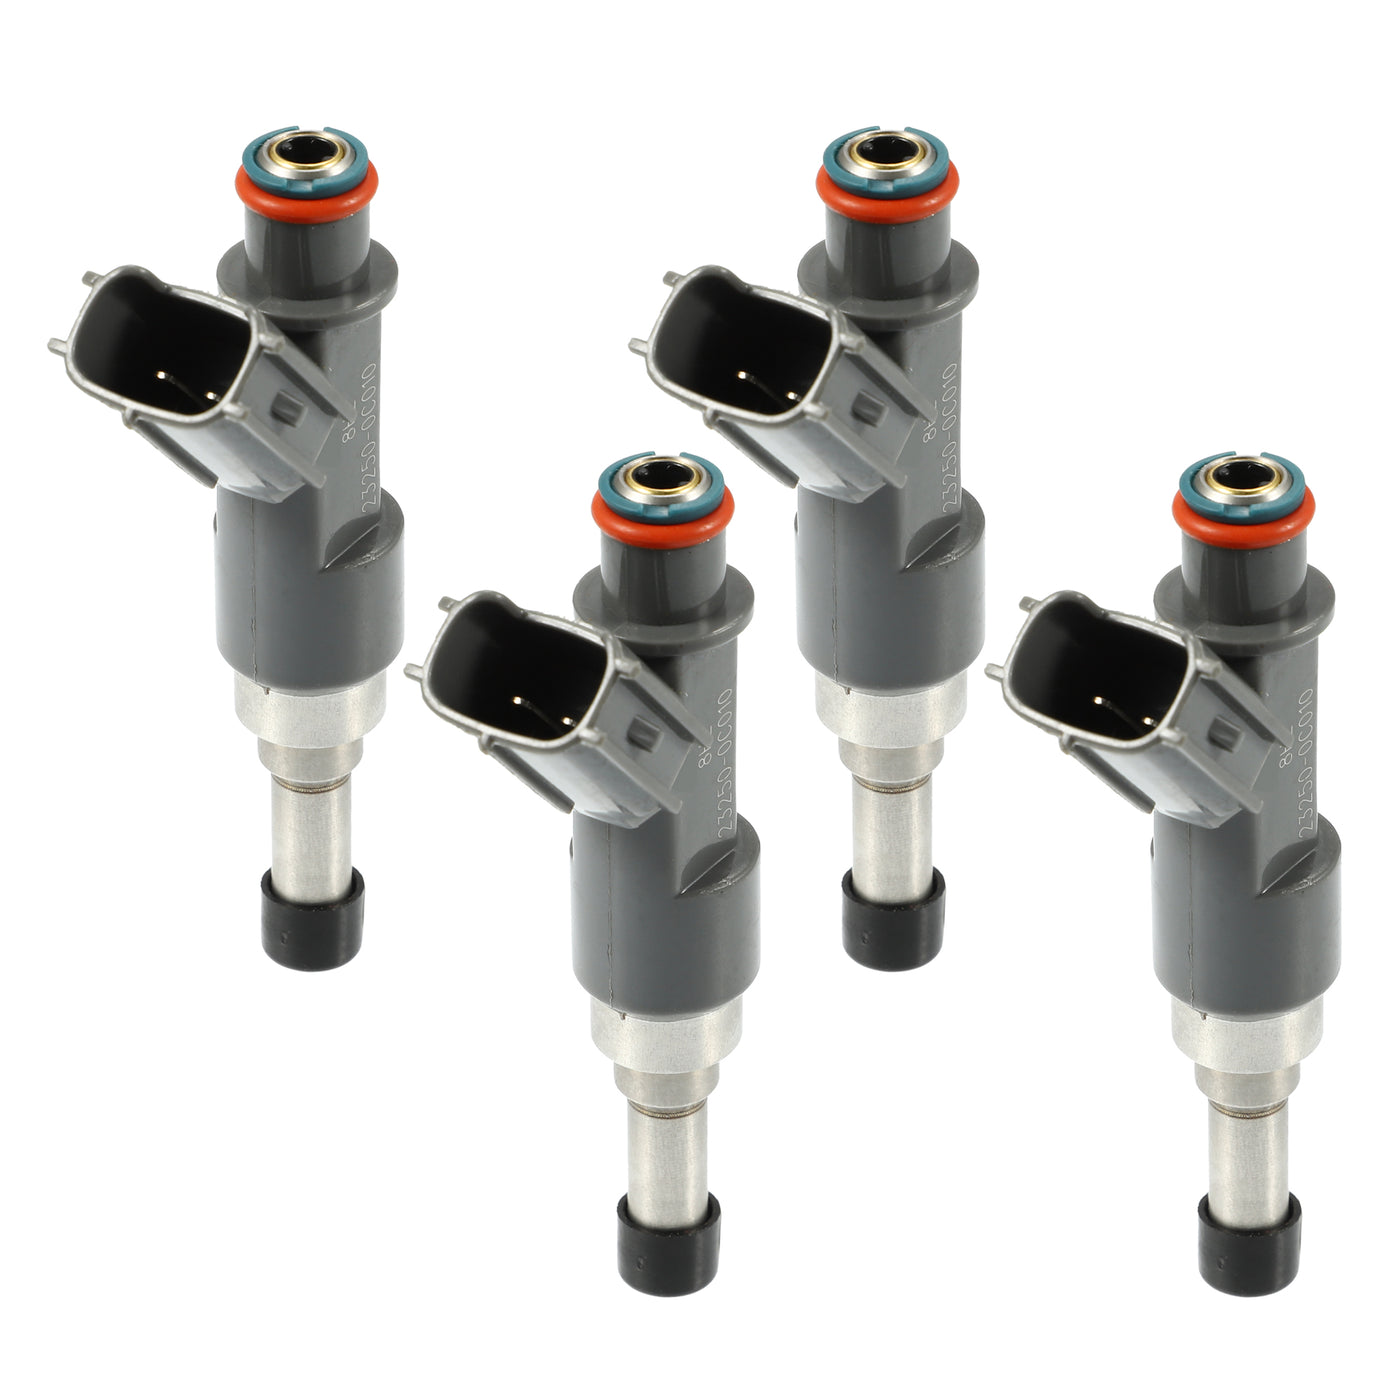 ACROPIX Car Fuel Injector Nozzle Replacement for Toyota Tacoma 2.7L 2005-2014 23250-0C010 - Pack of 4 Gray